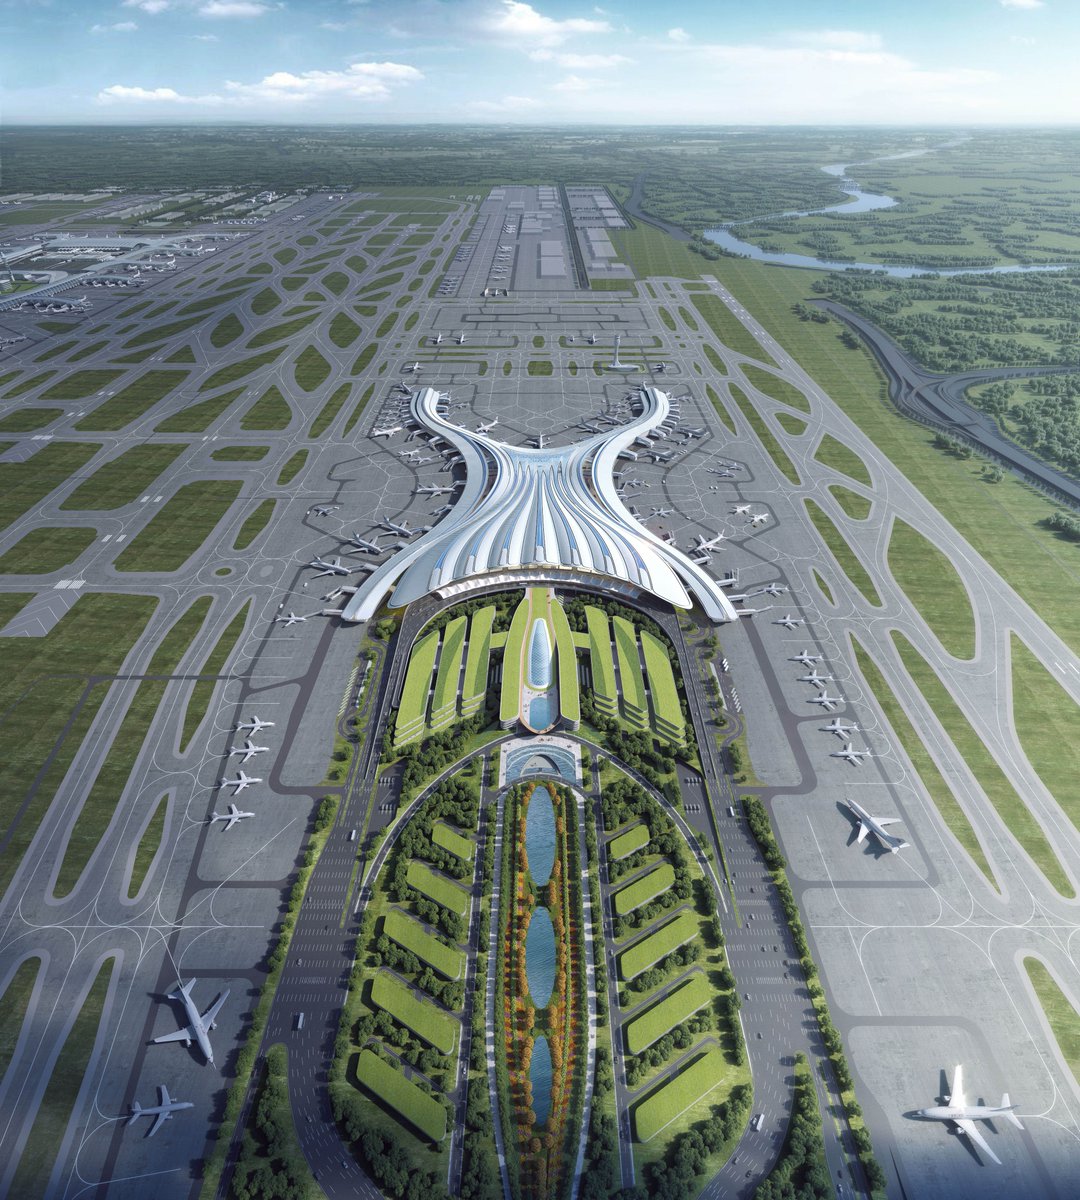 And this is what T3 will look like from the outside when it is finished. It has a similar shape with Chongqing Jiangbei's T3. Airport terminal designs in China are showing clear 'generation' trends that changes every few years.